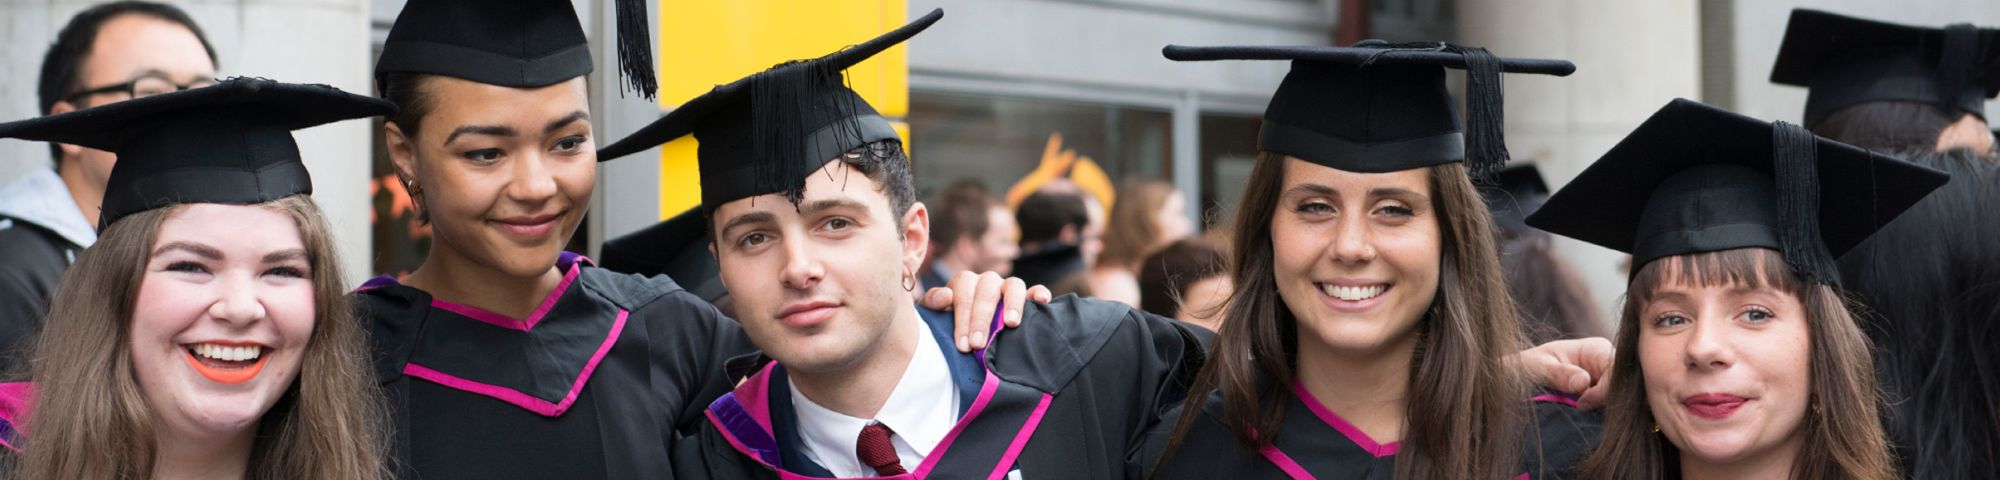 A group of students wearing graduation robes and mortarboard caps after graduating from University of the Arts London UAL